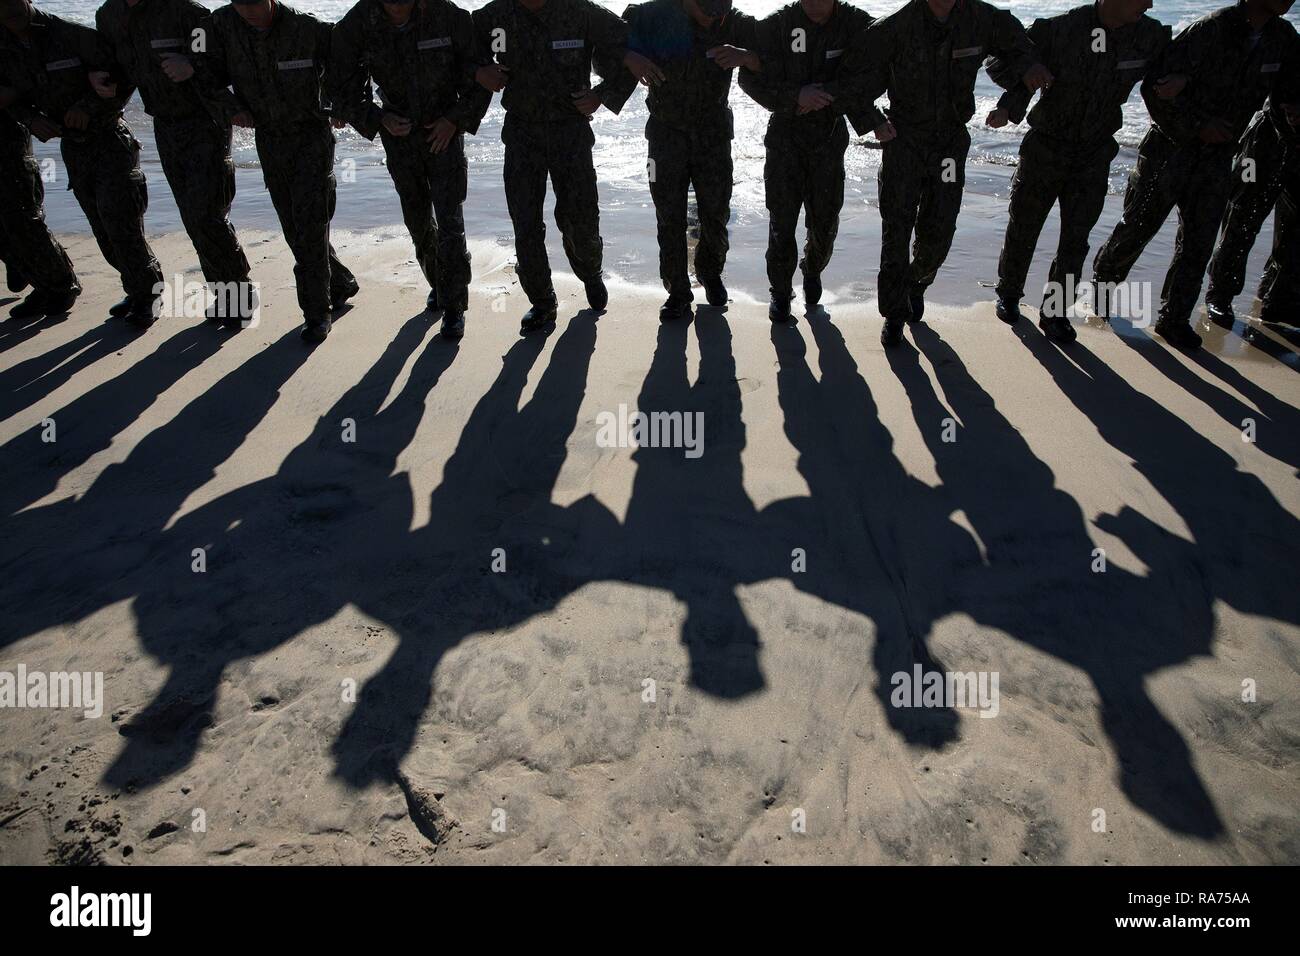 U.S. Navy SEAL candidates back into the surf during Basic Underwater Demolition SEAL training at the Navy Special Warfare Center April 9, 2018 in Coronado, California. SEALs are the maritime component of U.S. Special Forces and are trained to conduct a variety of operations from the sea, air and land. Stock Photo